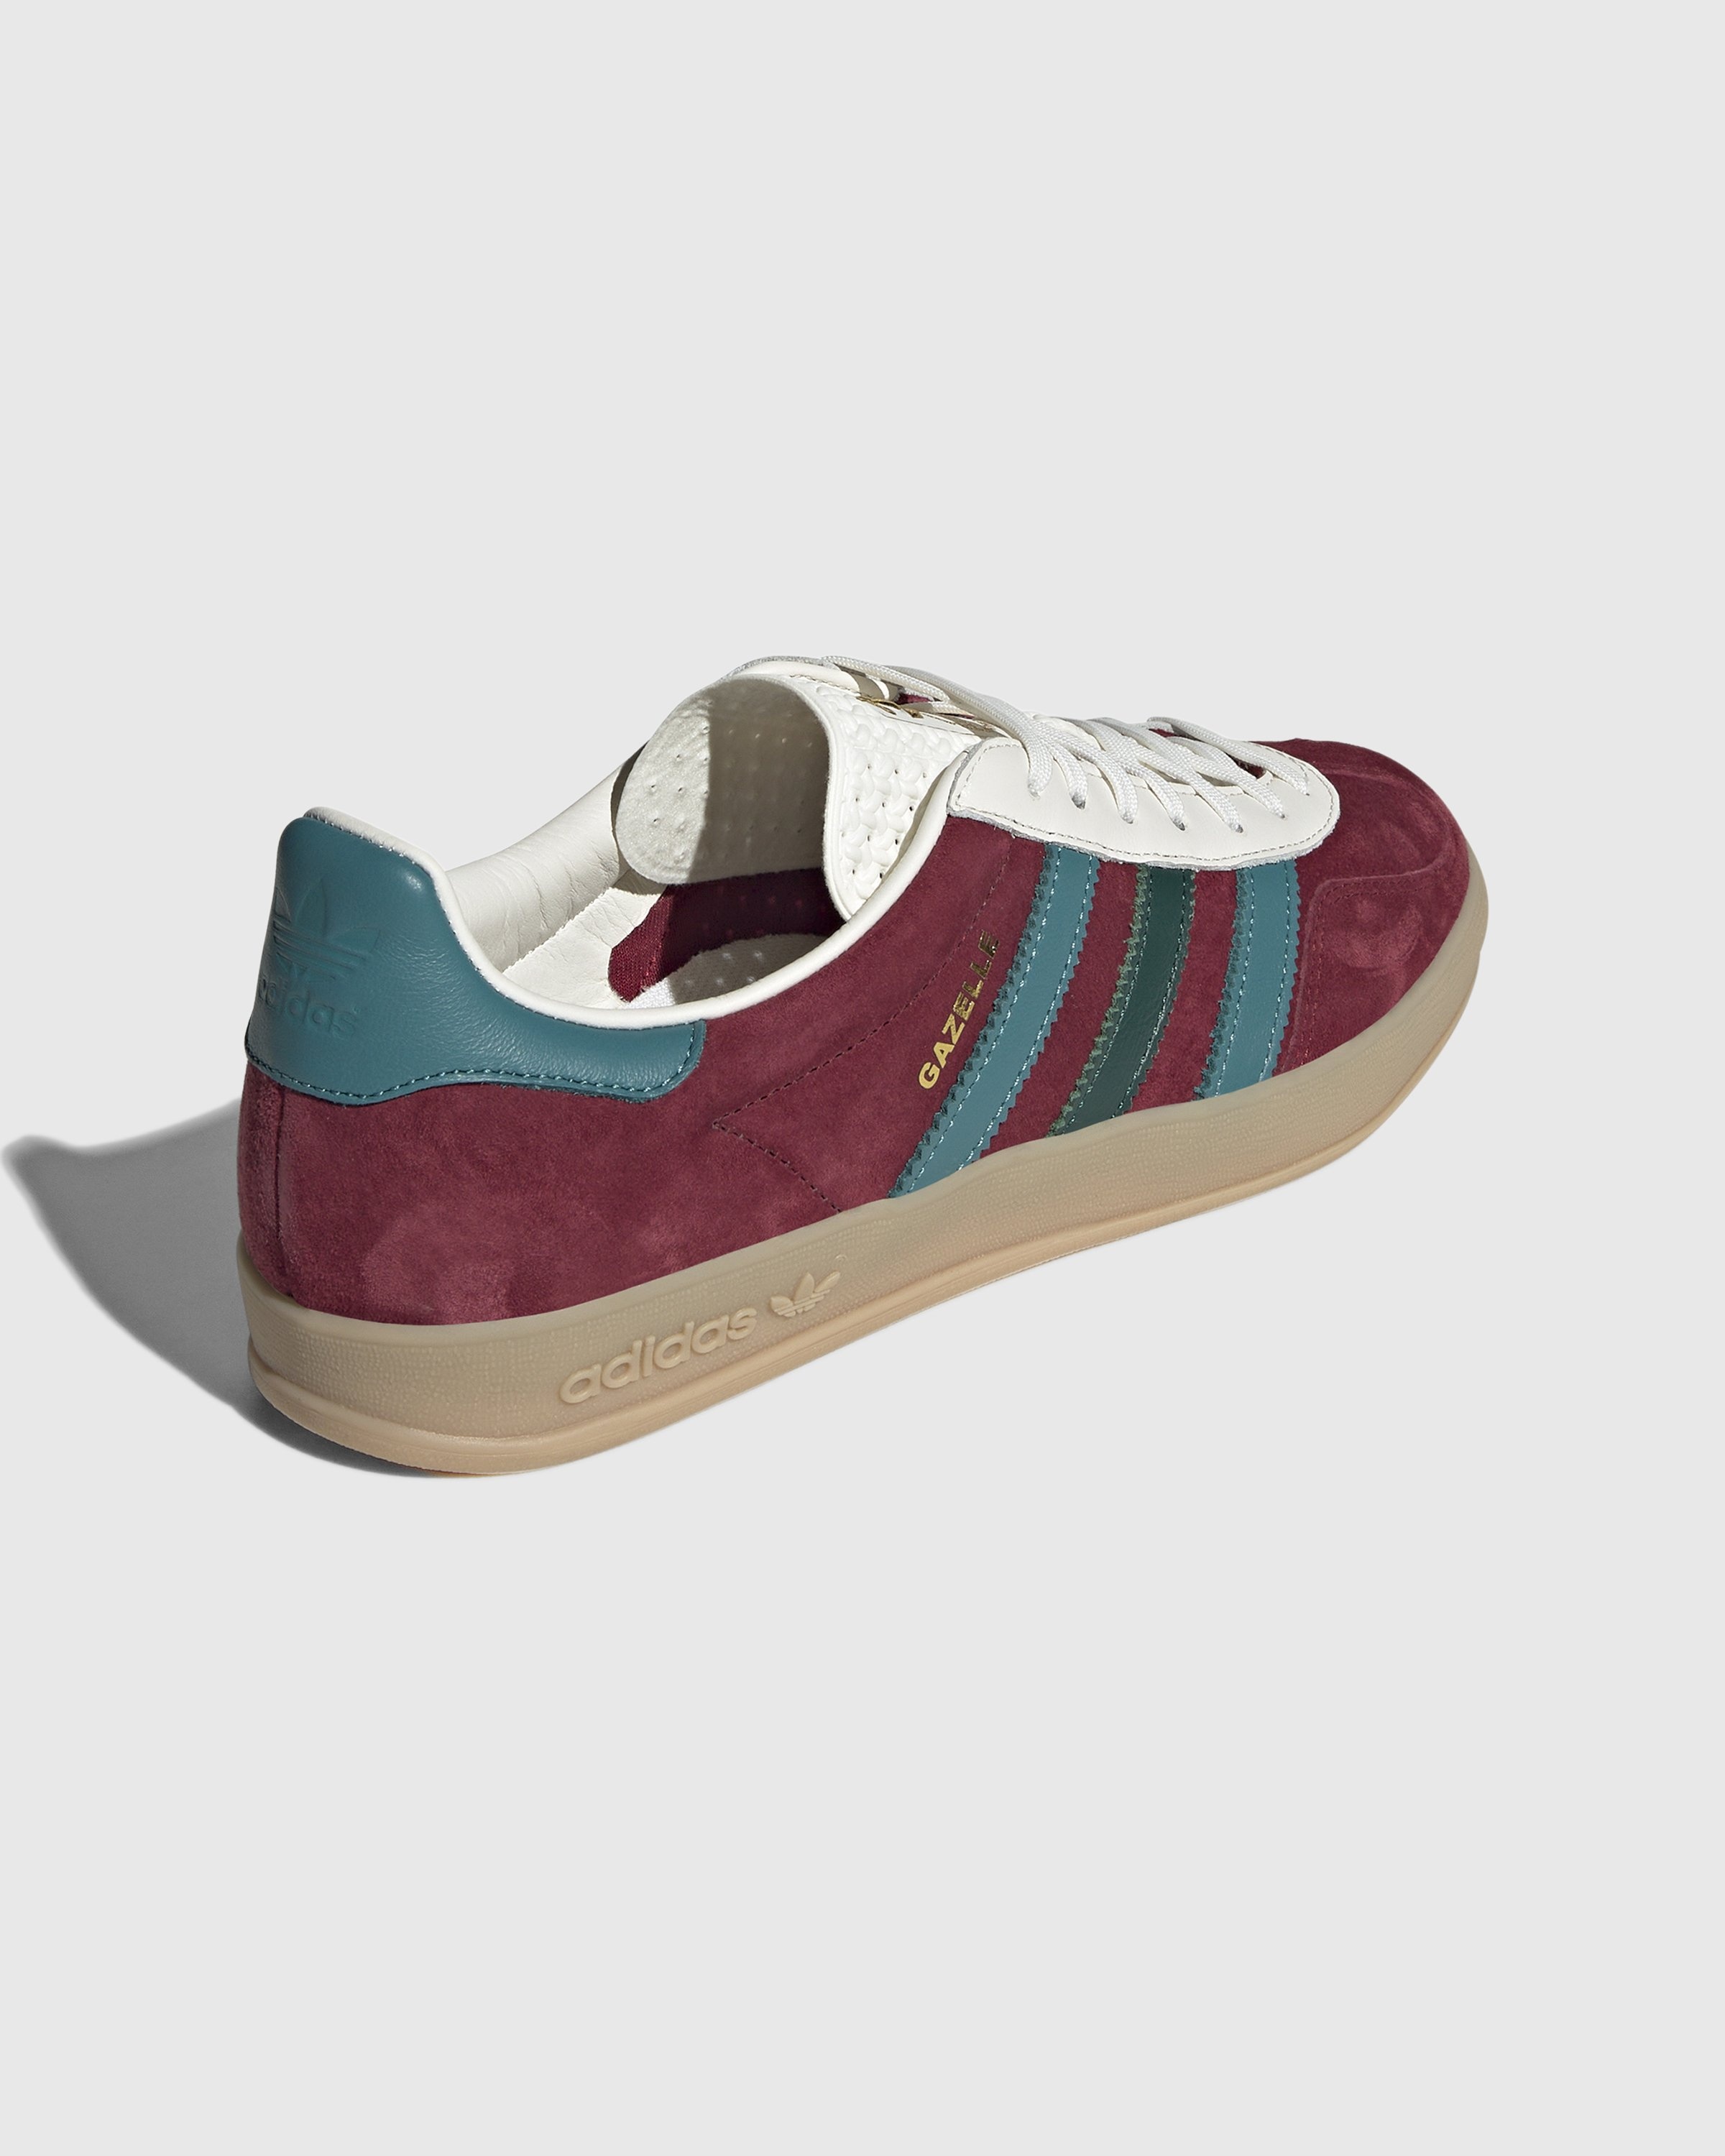 Adidas – adidas – Gazelle Core Burgundy/Green - Sneakers - Red - Image 4